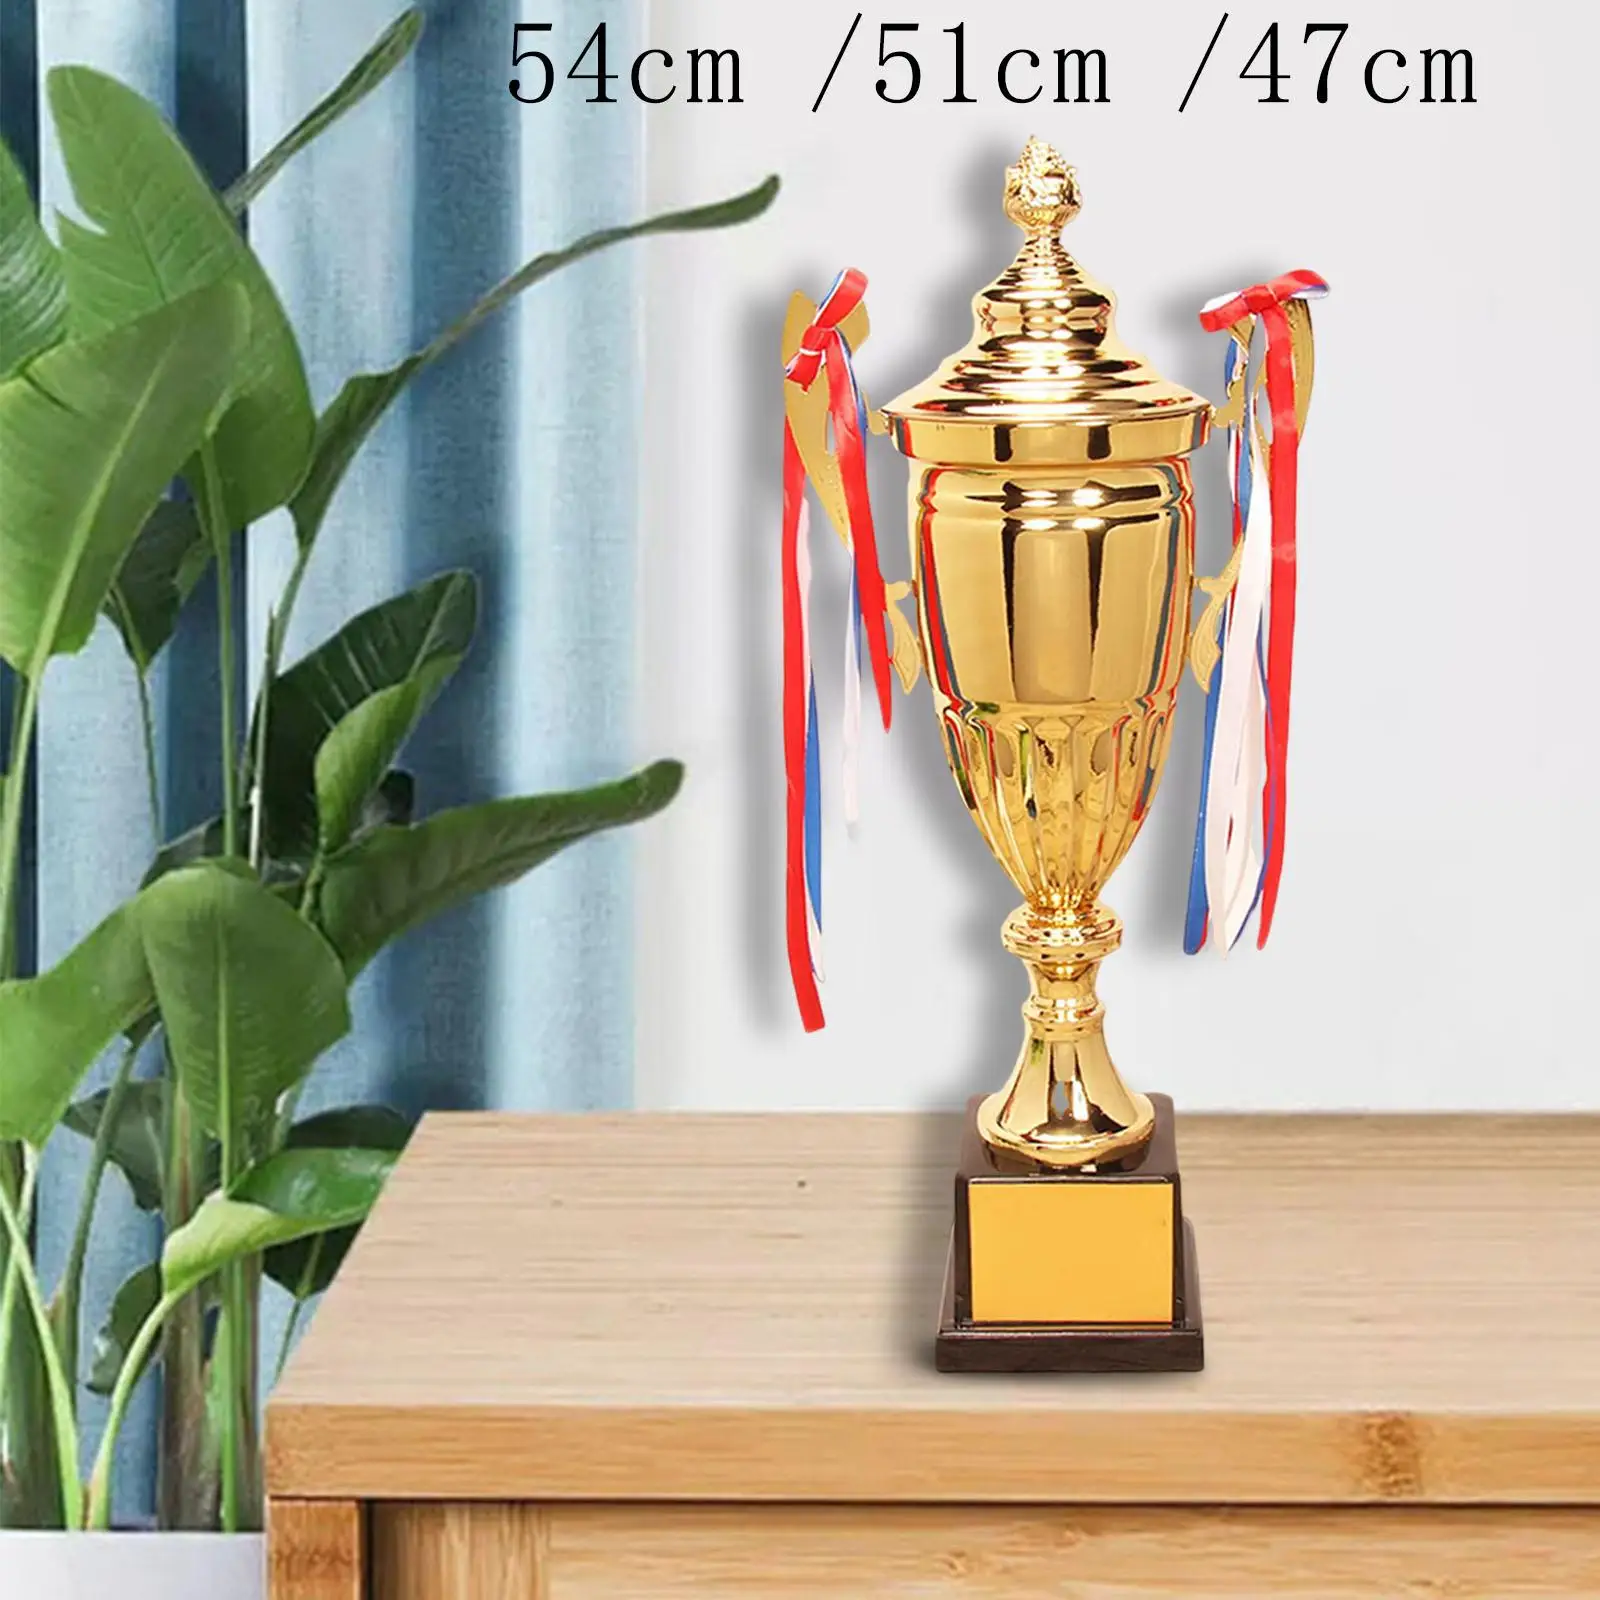 Award Trophy Large Trophy Rewards with Base for Celebrations Soccer Football League Match Tournaments Competition Party Favors